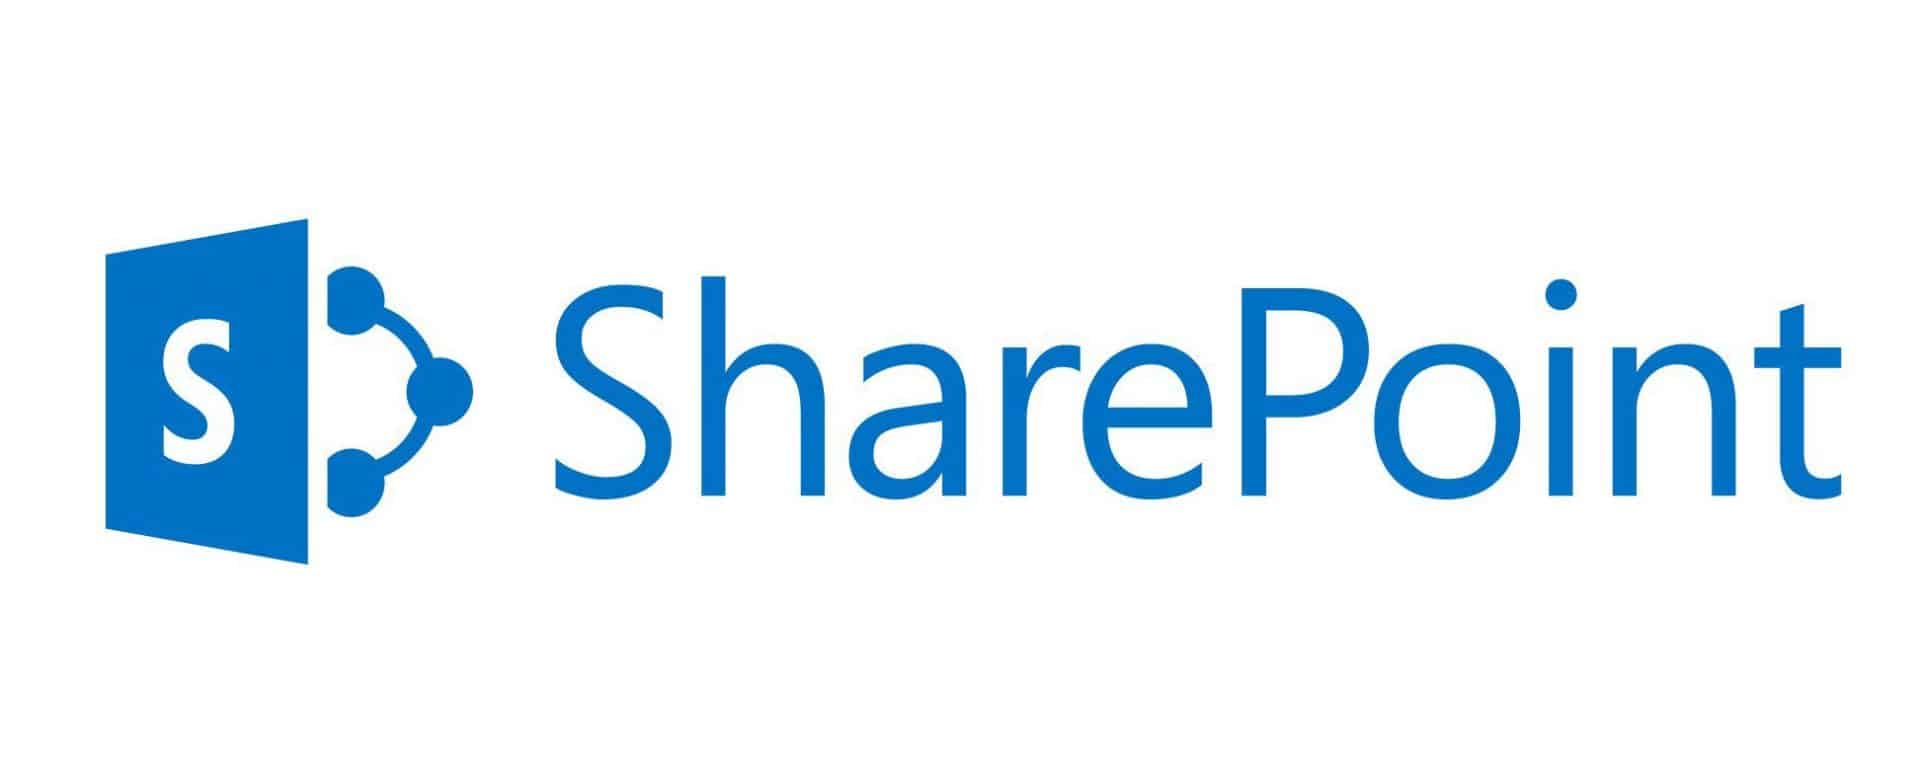 What is SharePoint and how can it help my business?